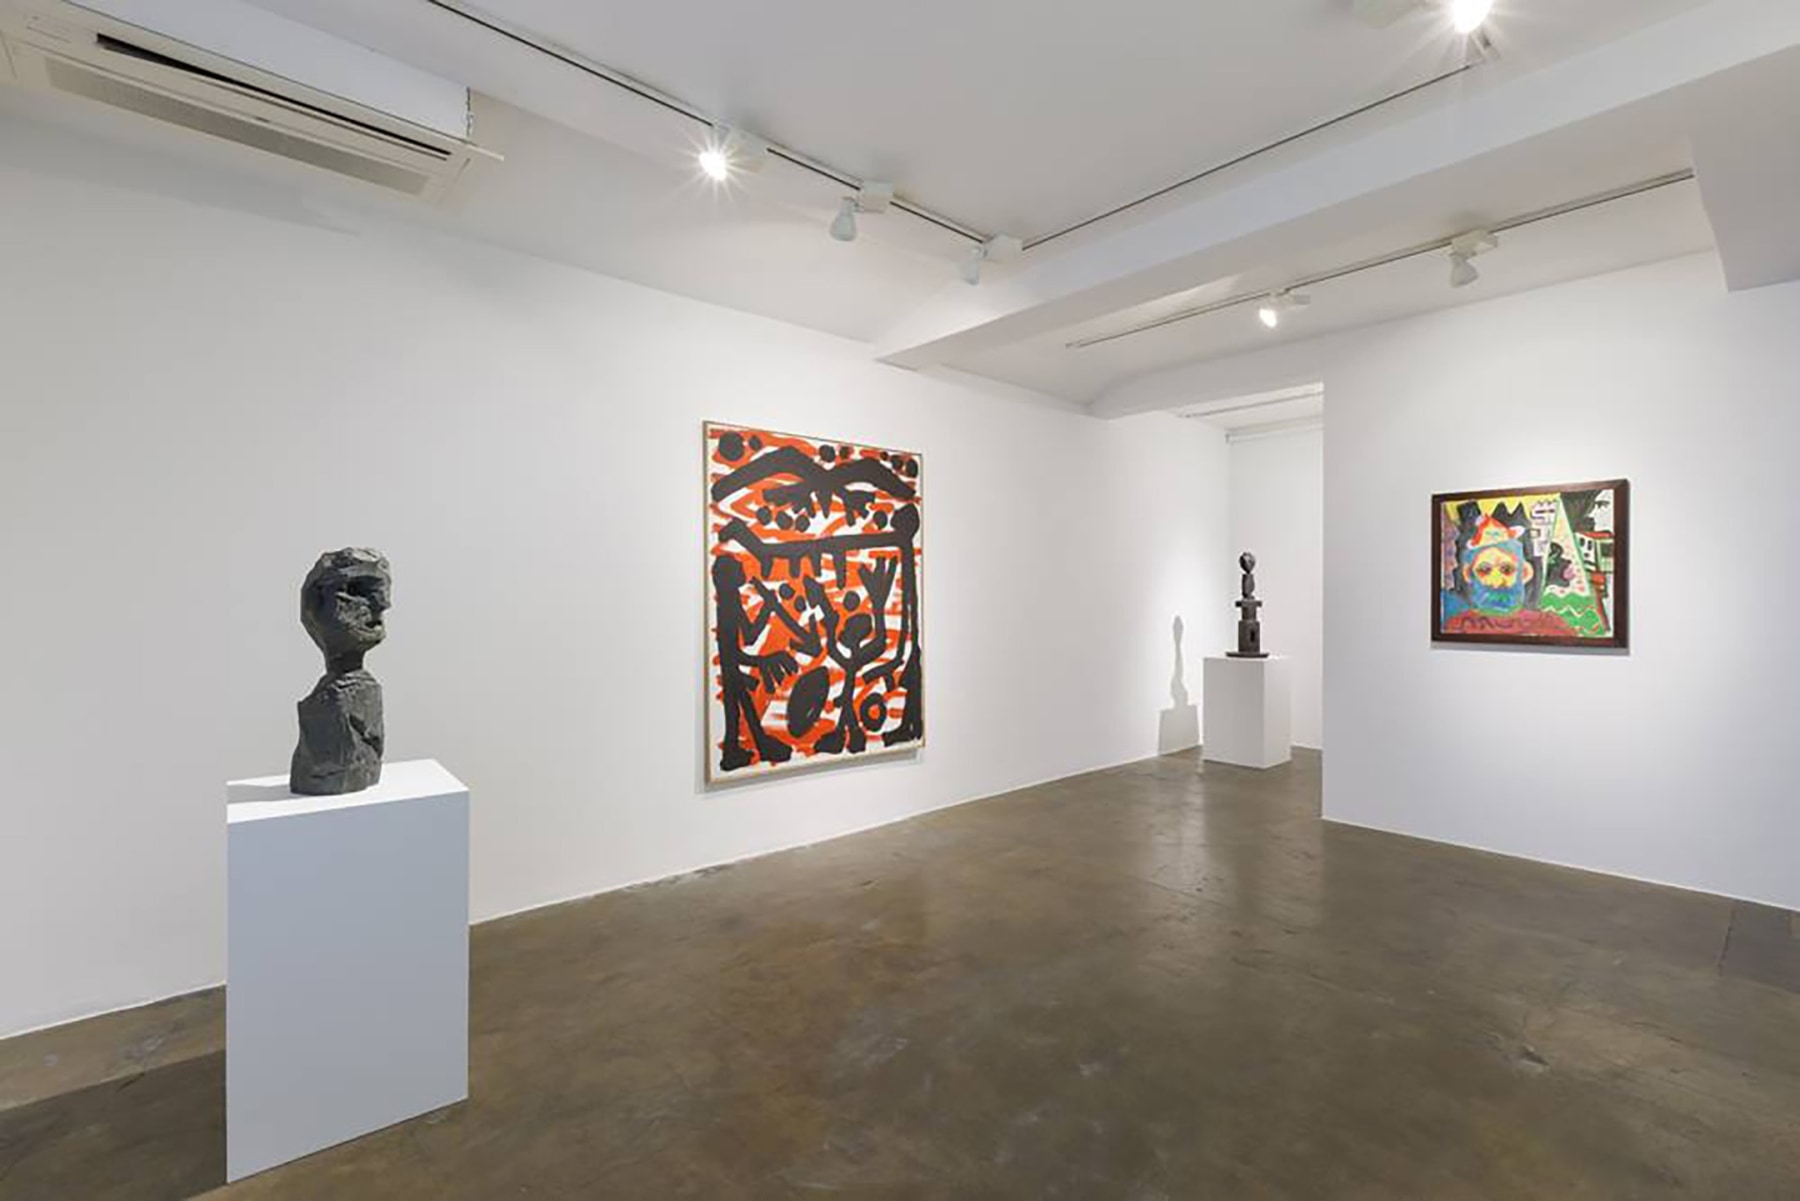 Installation view, Markus Lüpertz and A.R. Penck in Dialogue, Eugean Lee Gallery, Seoul, 2016